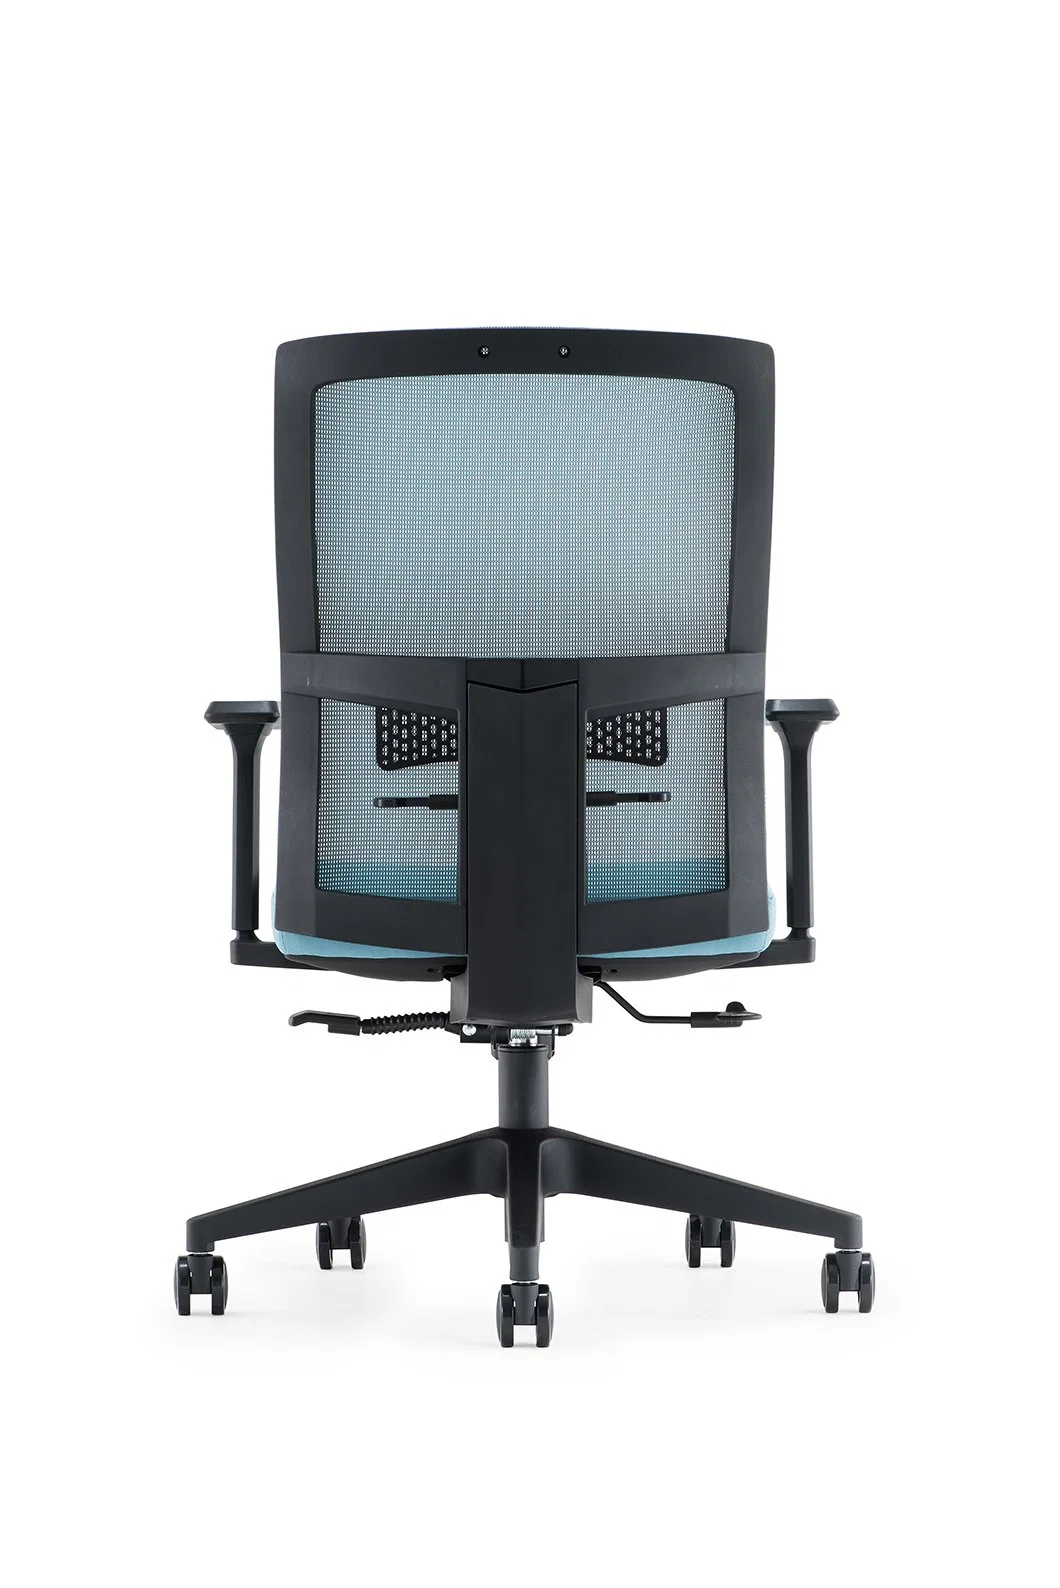 Sovan Mesh Swivel Executive Gaming Furniture Office Chair with Adjustable Armrest High Density Molded Foam